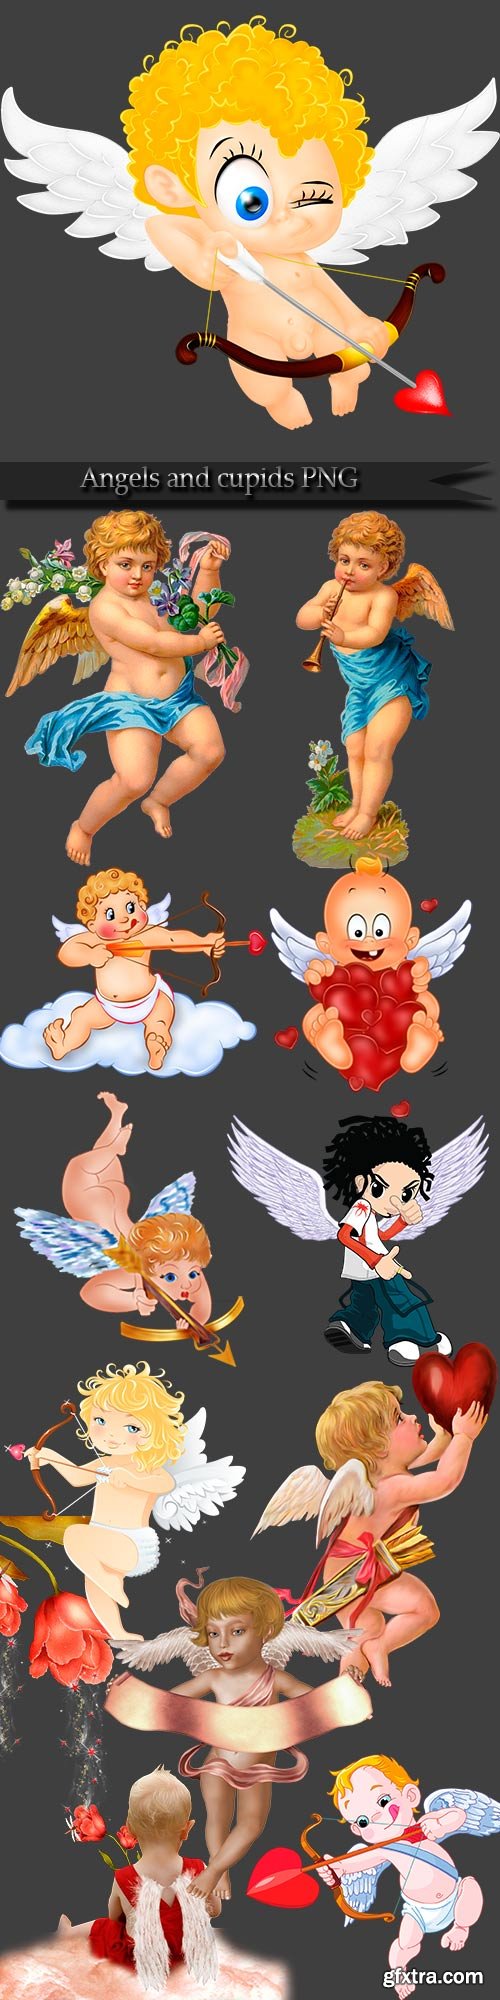 Angels and cupids PNG